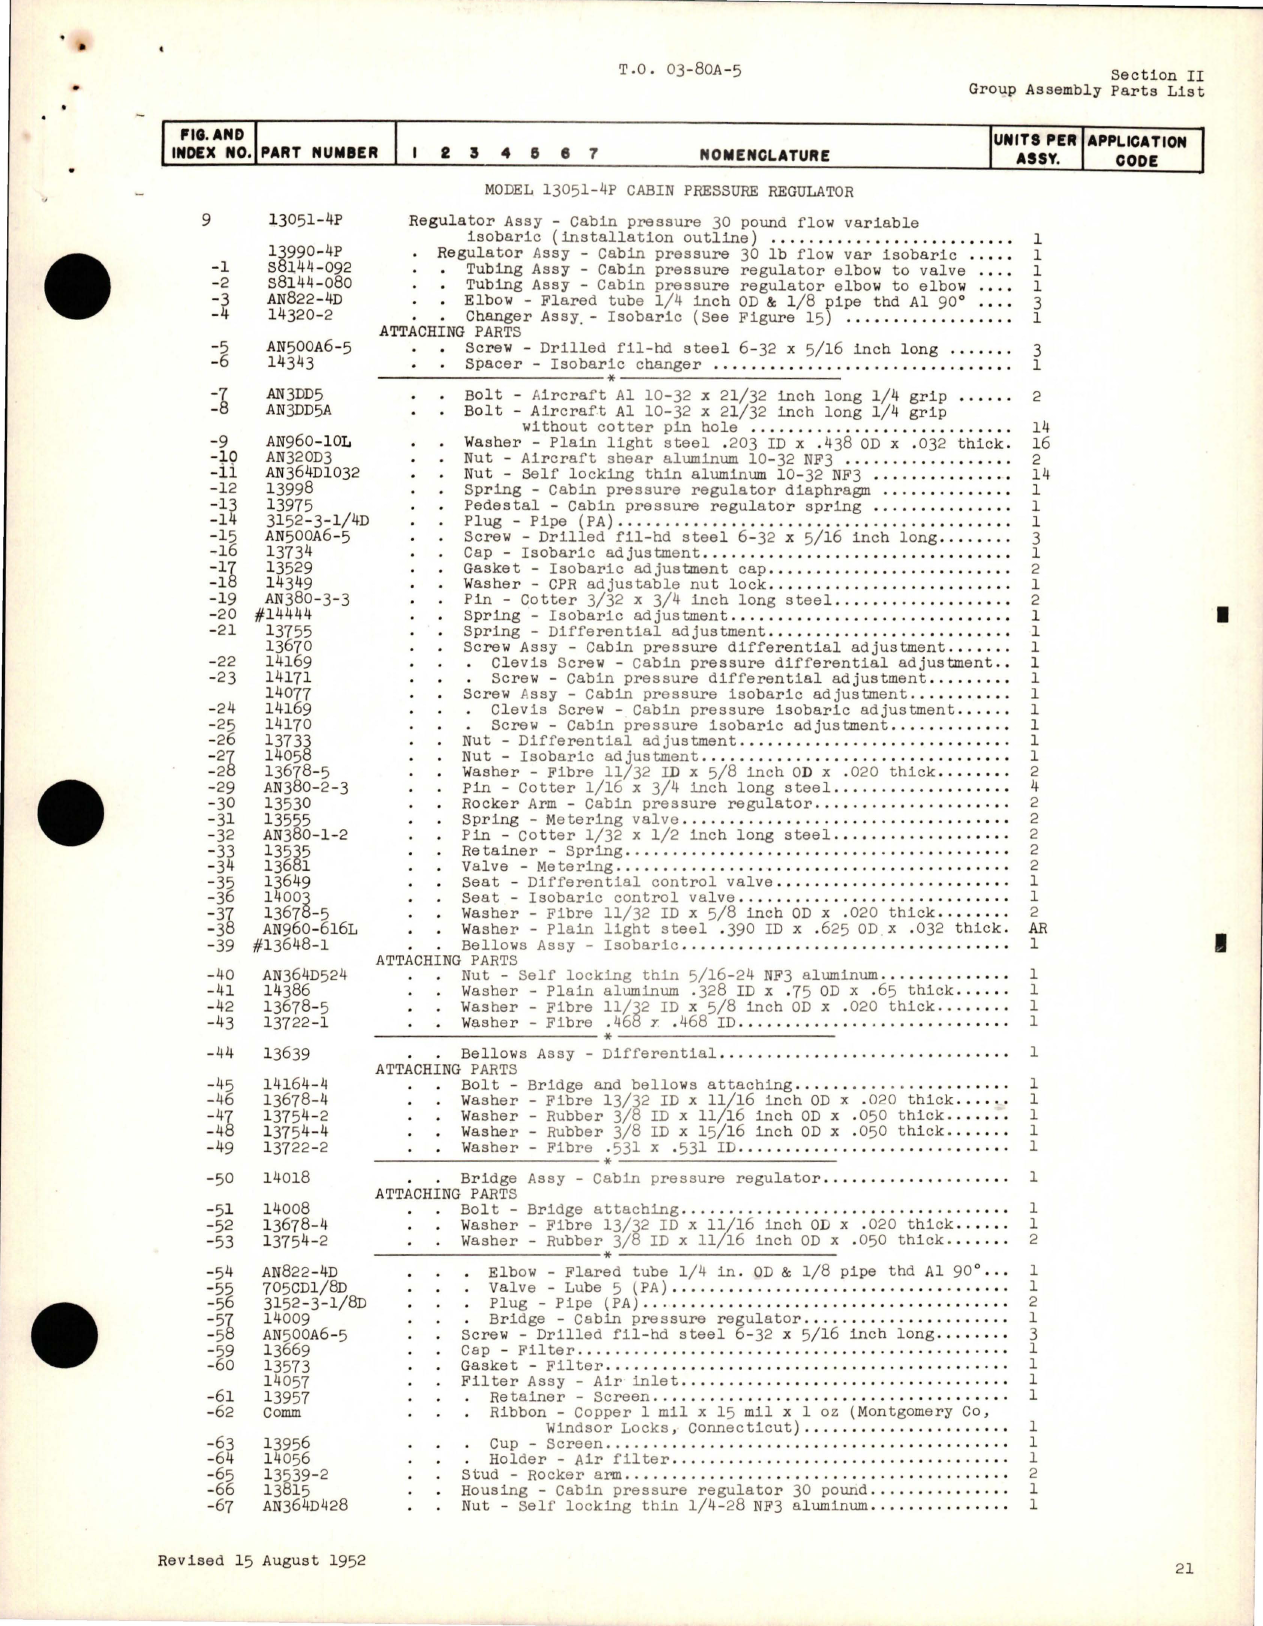 Sample page 5 from AirCorps Library document: Parts Catalog for Cabin Pressure Regulators 